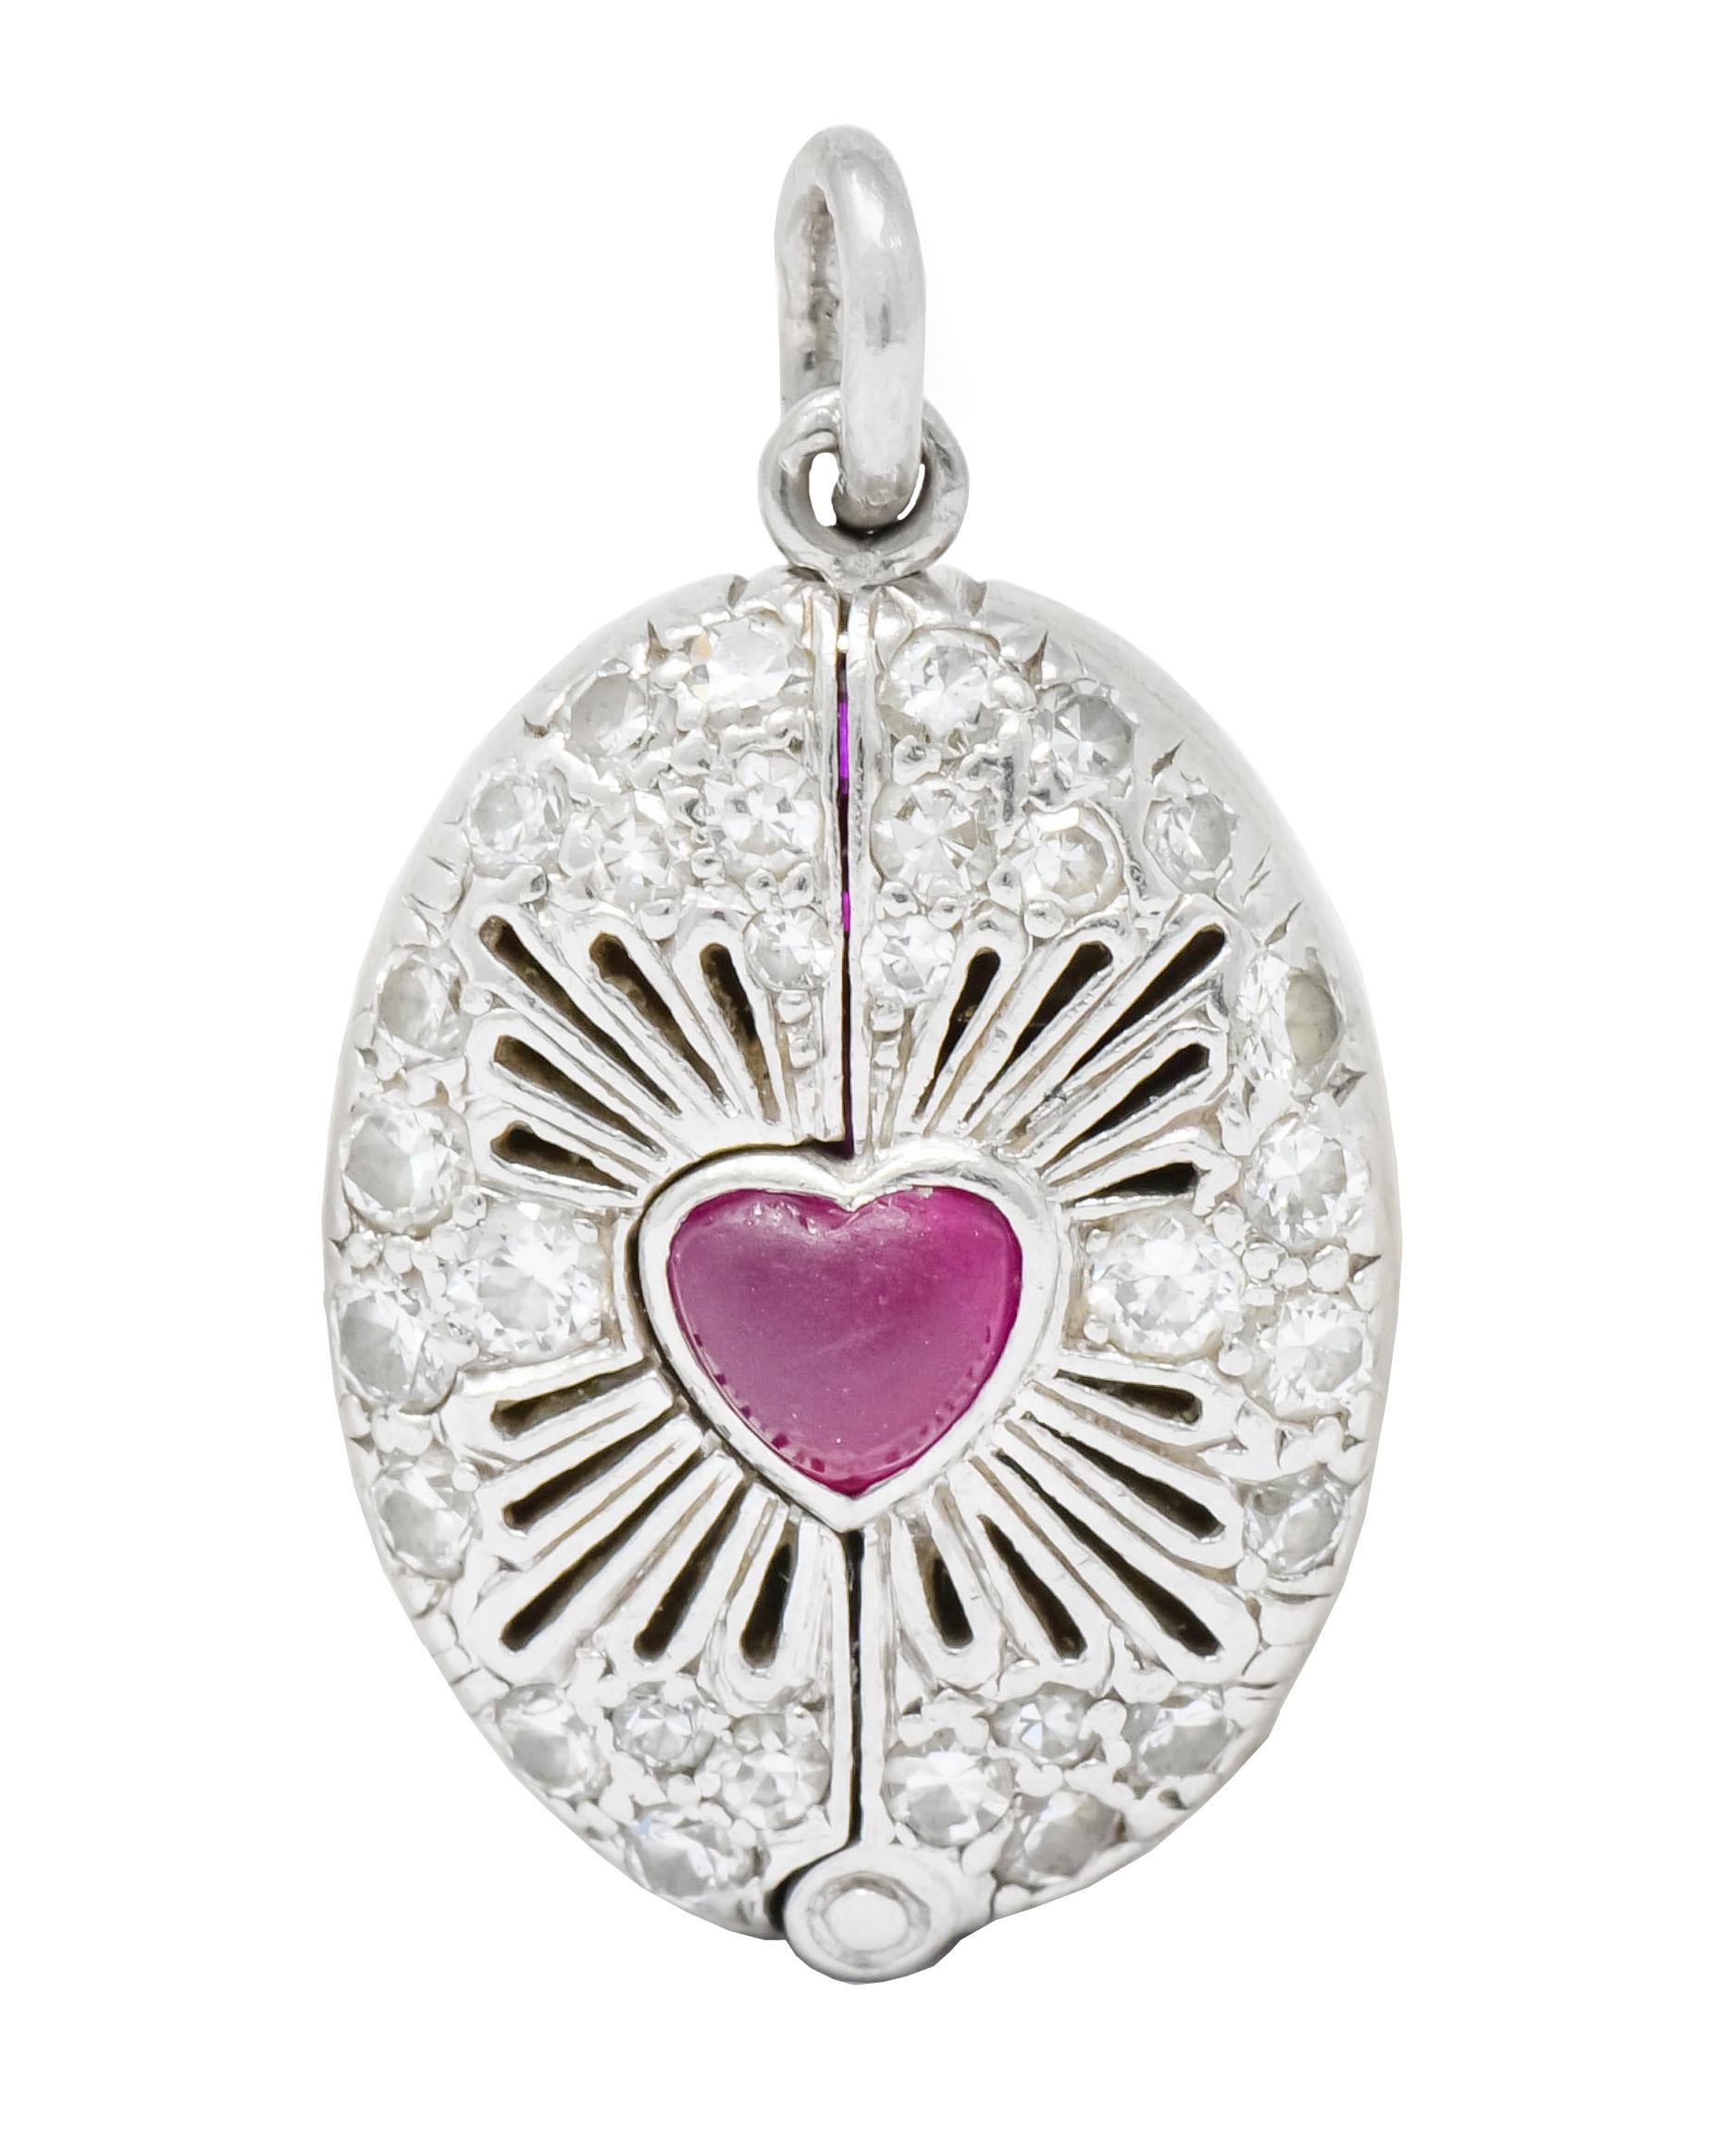 Charm designed as oval centering a ruby cabochon heart surrounded by pierced radiated line motif emulating the Sacred Heart of Jesus

Accented throughout by bead set old European and single cut diamonds weighing approximately

Opens on a hinge to